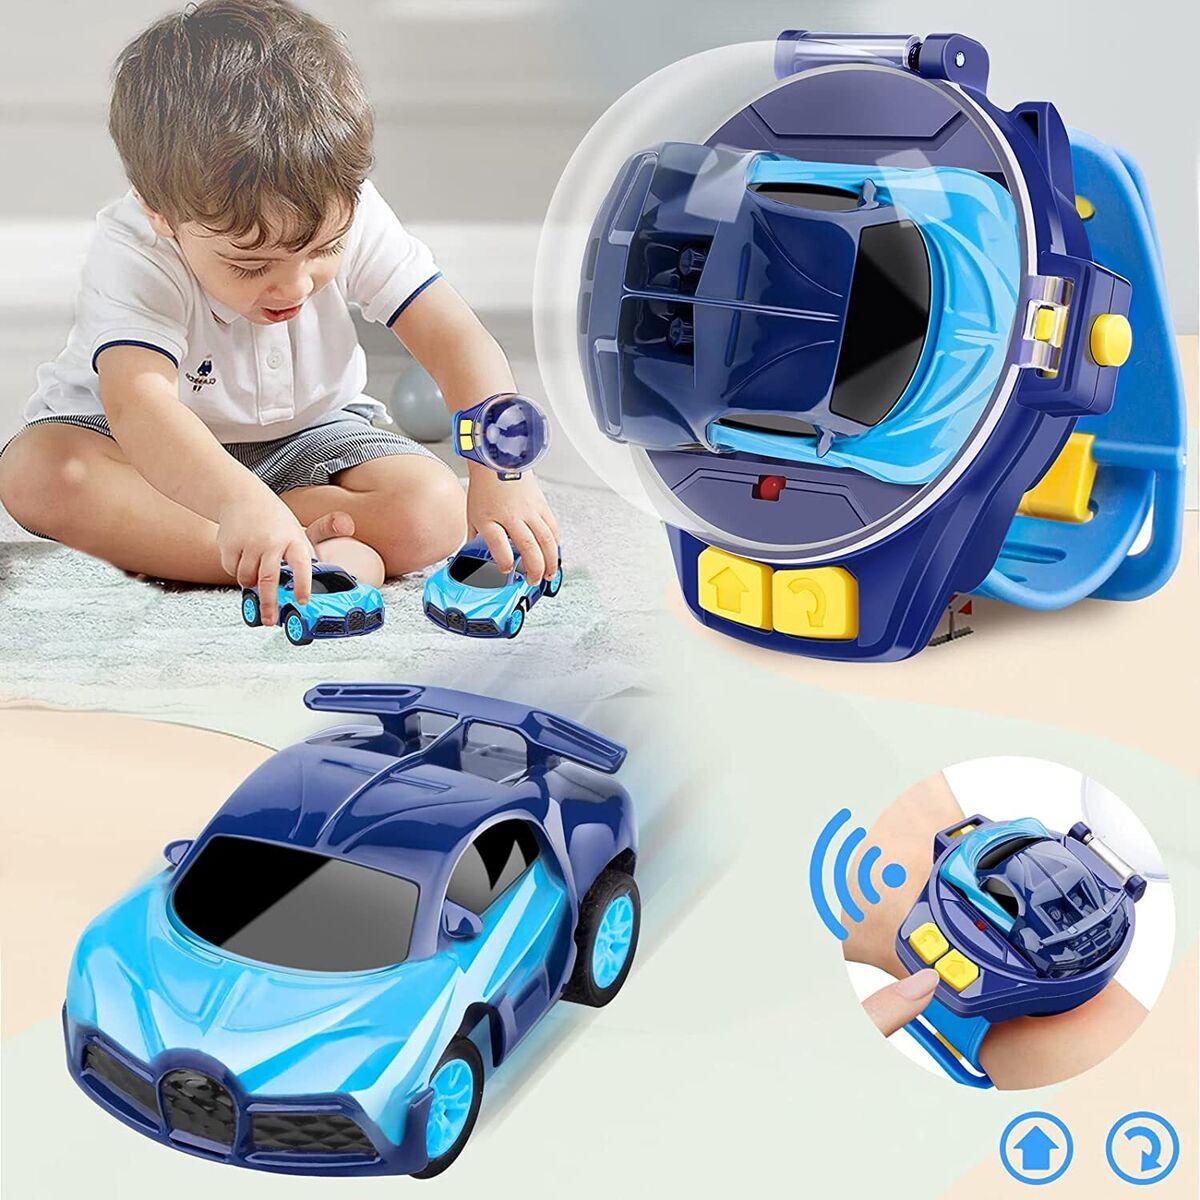 Watch Car Remote Control: Experience the ultimate race with a watch car remote control! 